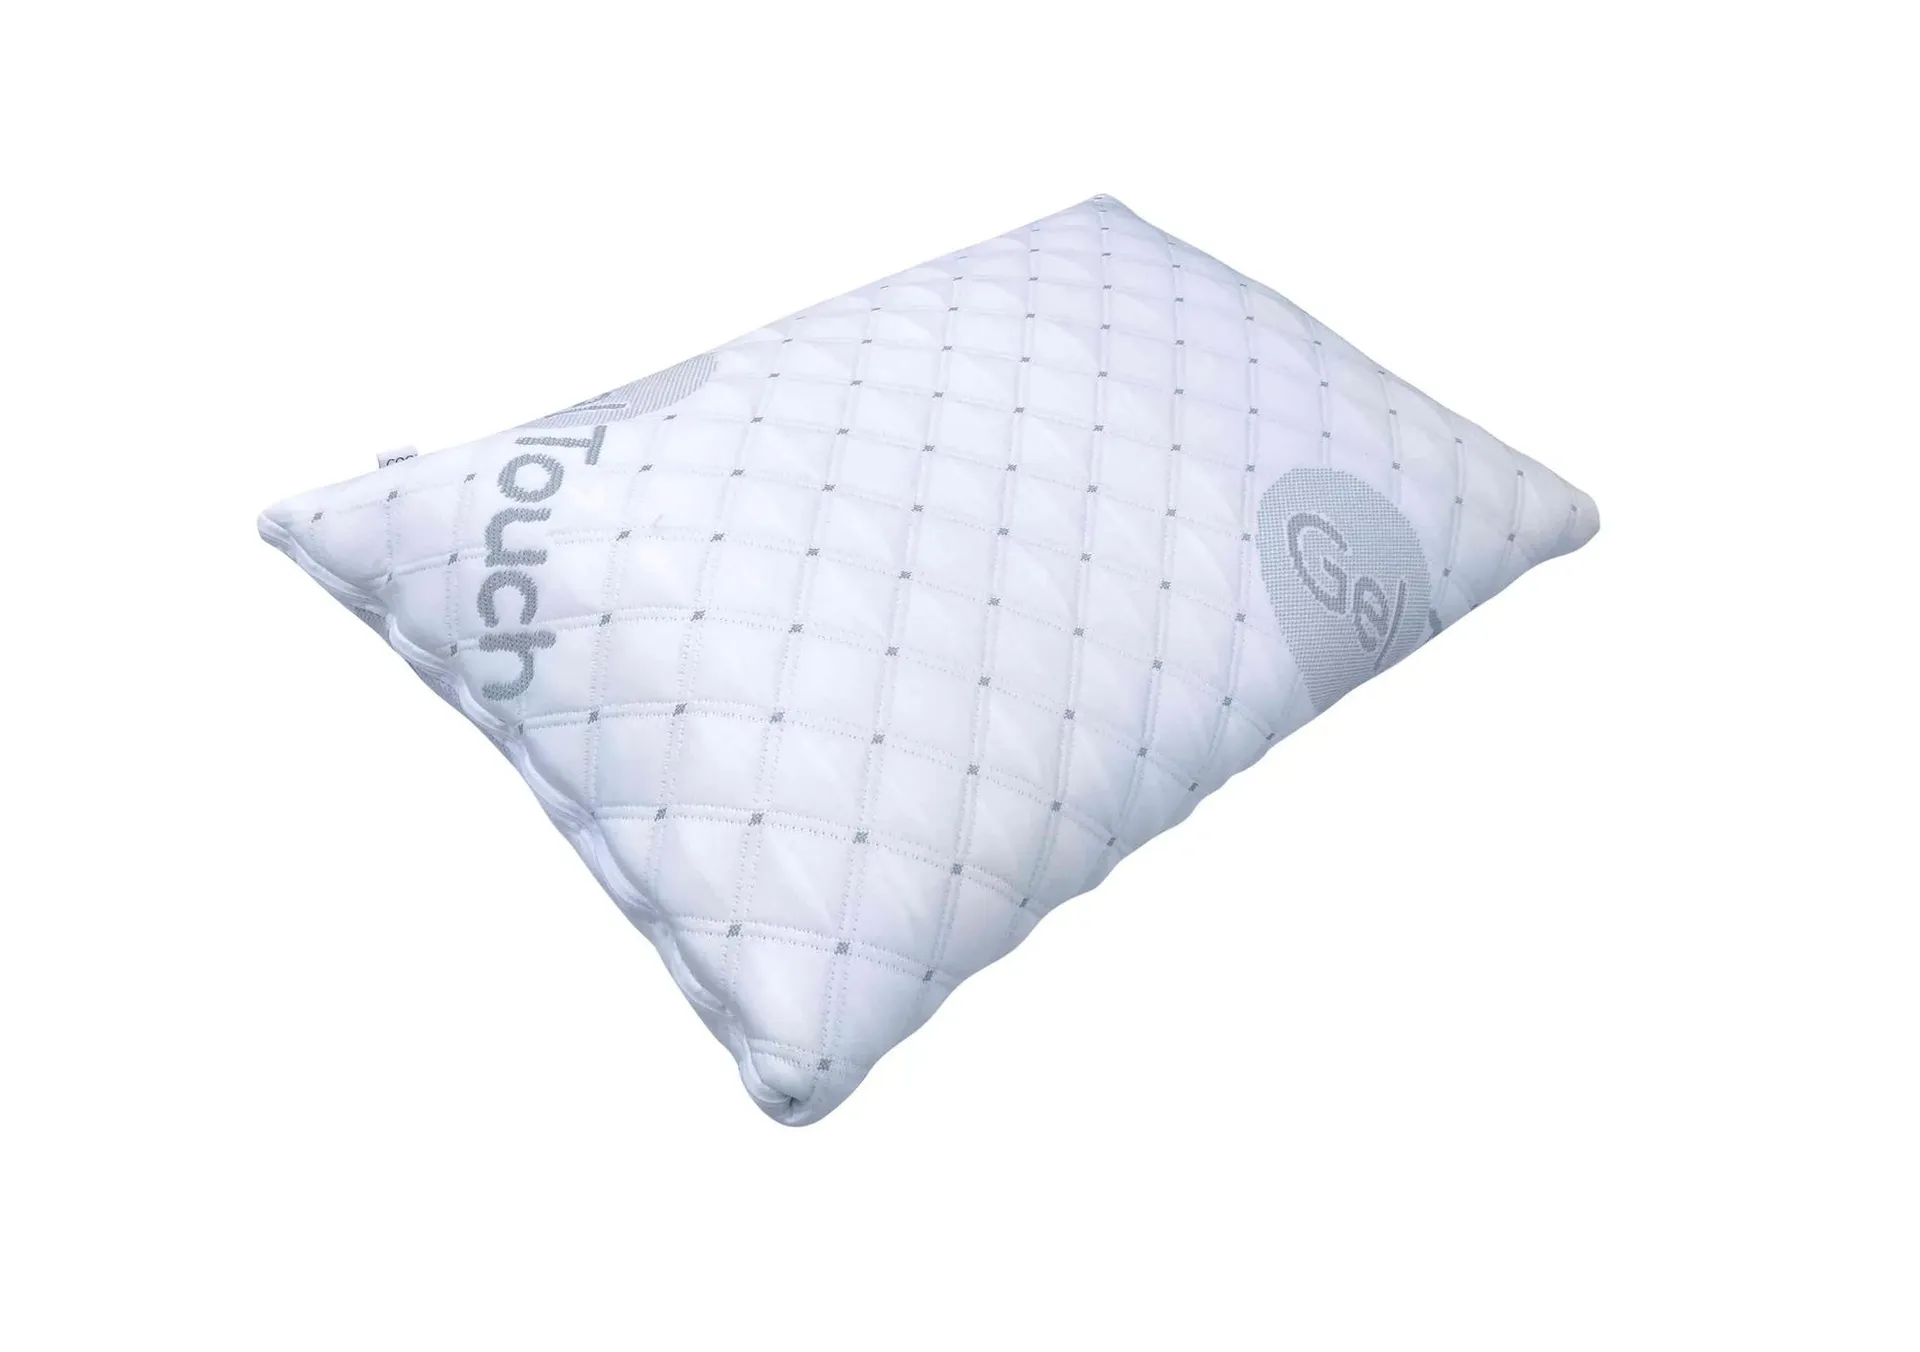 Geltouch Cozy Pillow